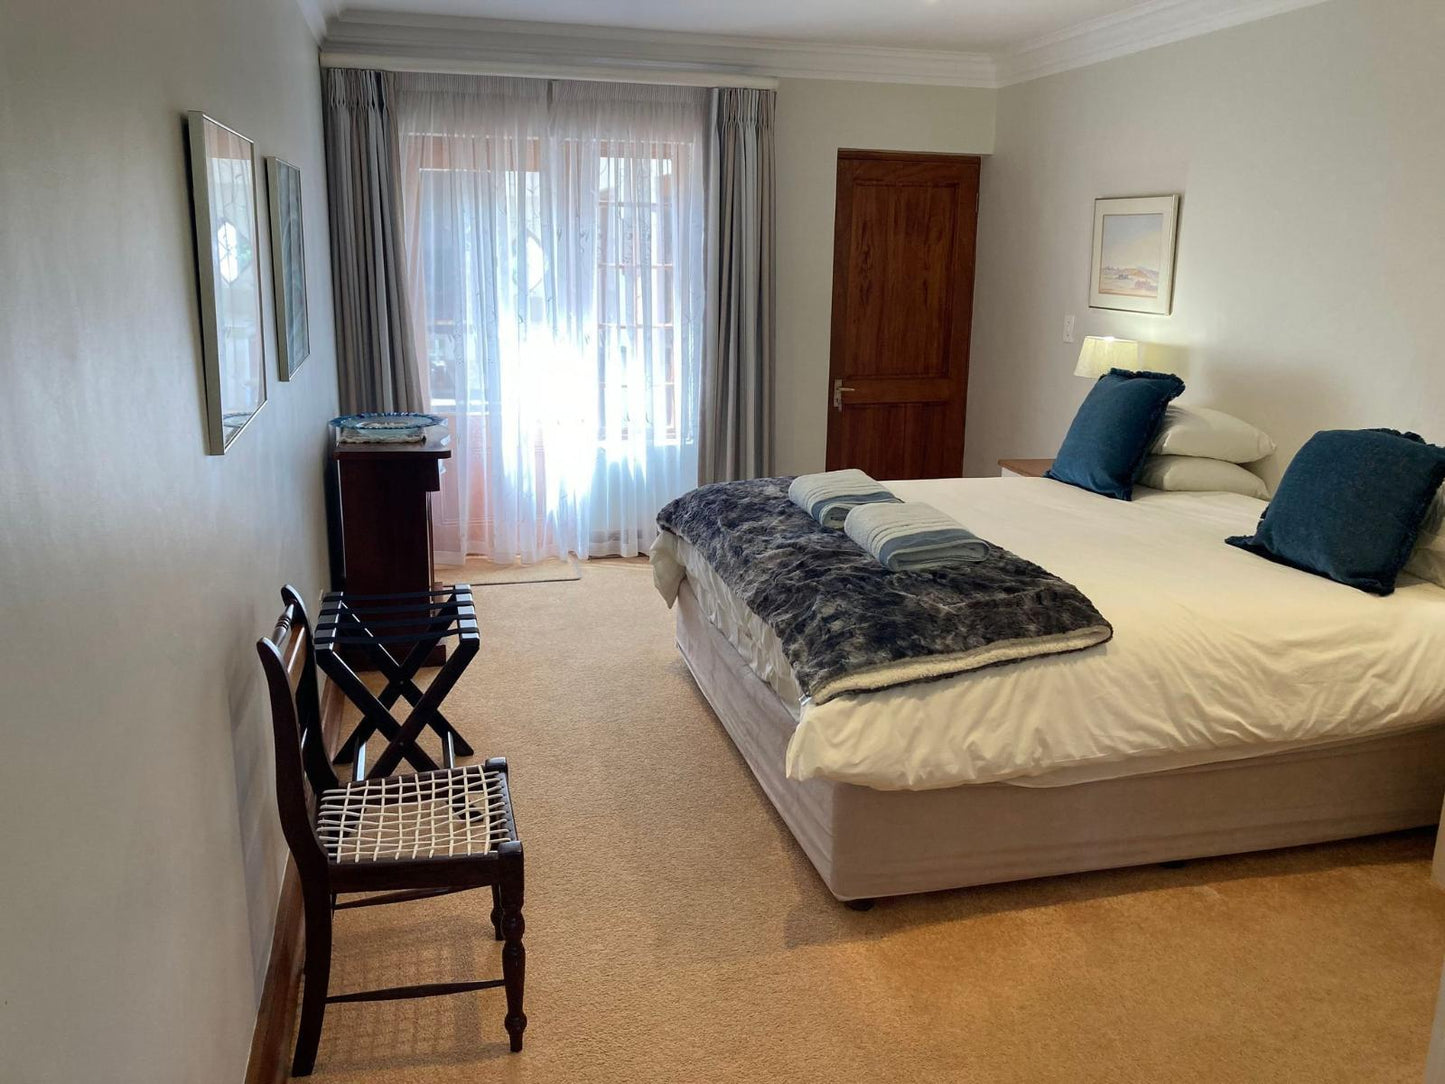 Lodge Room 2 @ Heilfontein Country Estate